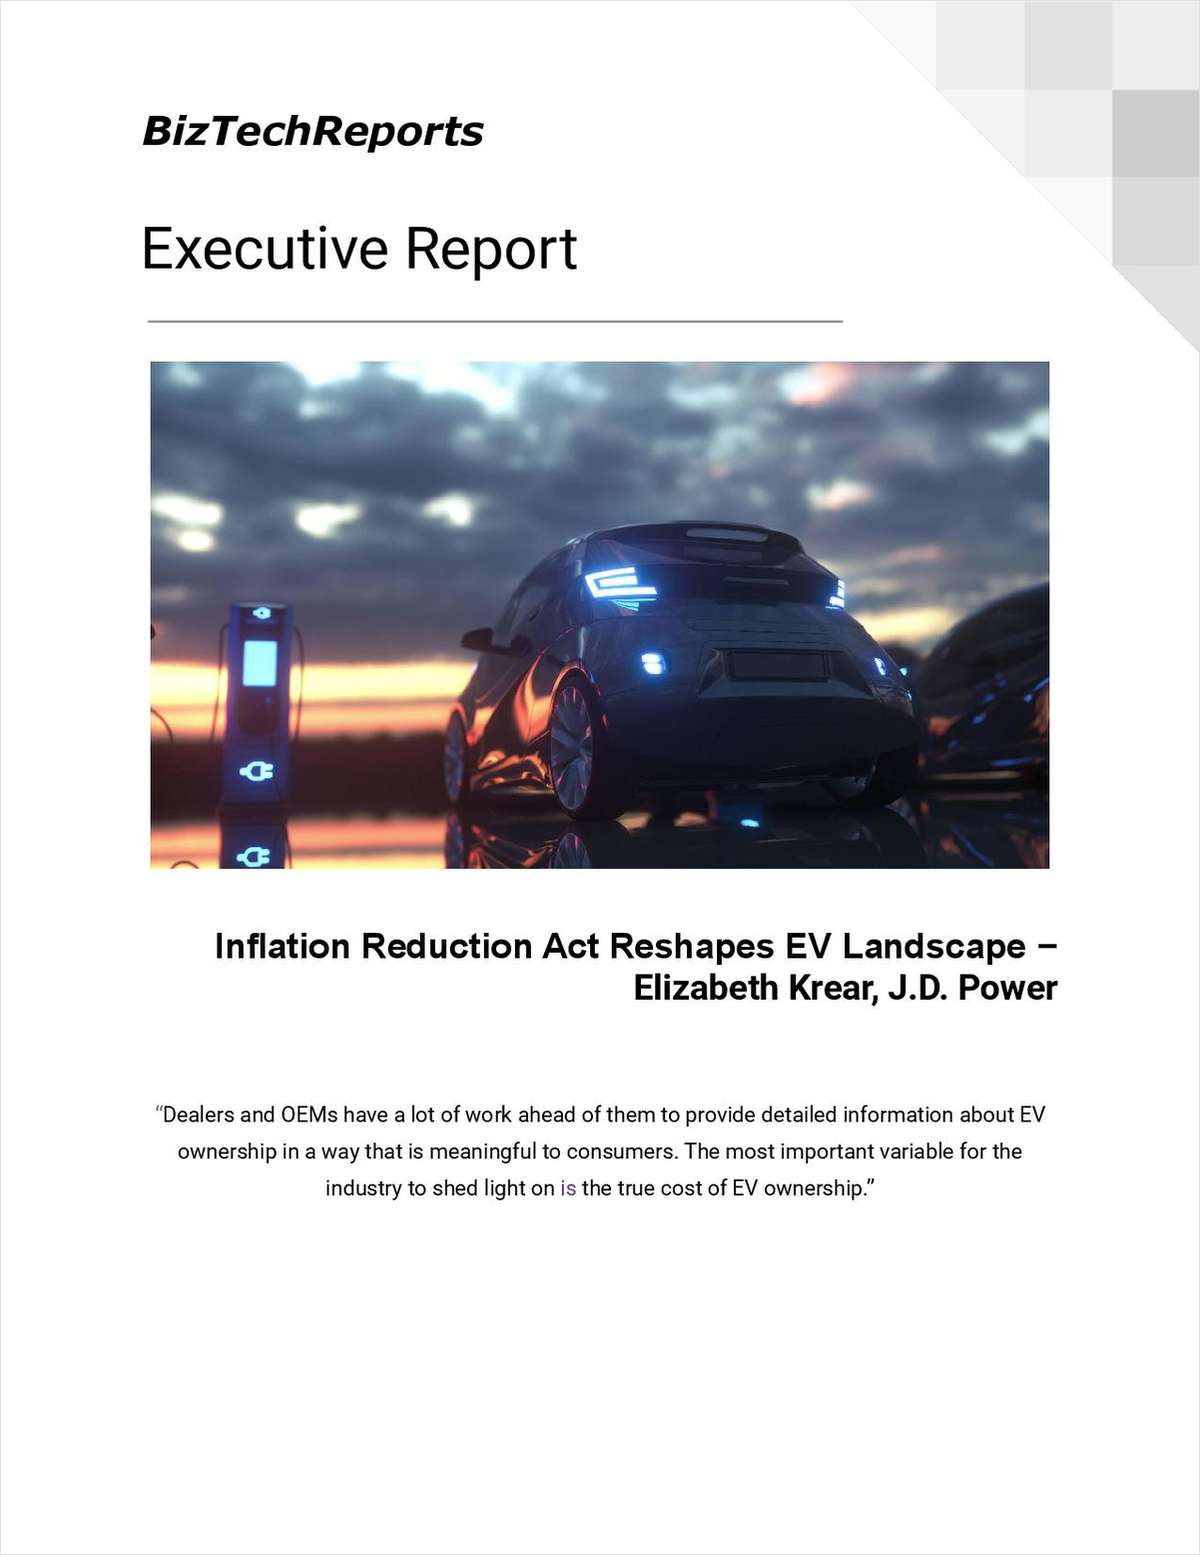 J.D. Power Examines How the Inflation Reduction Act Reshapes EV Landscape